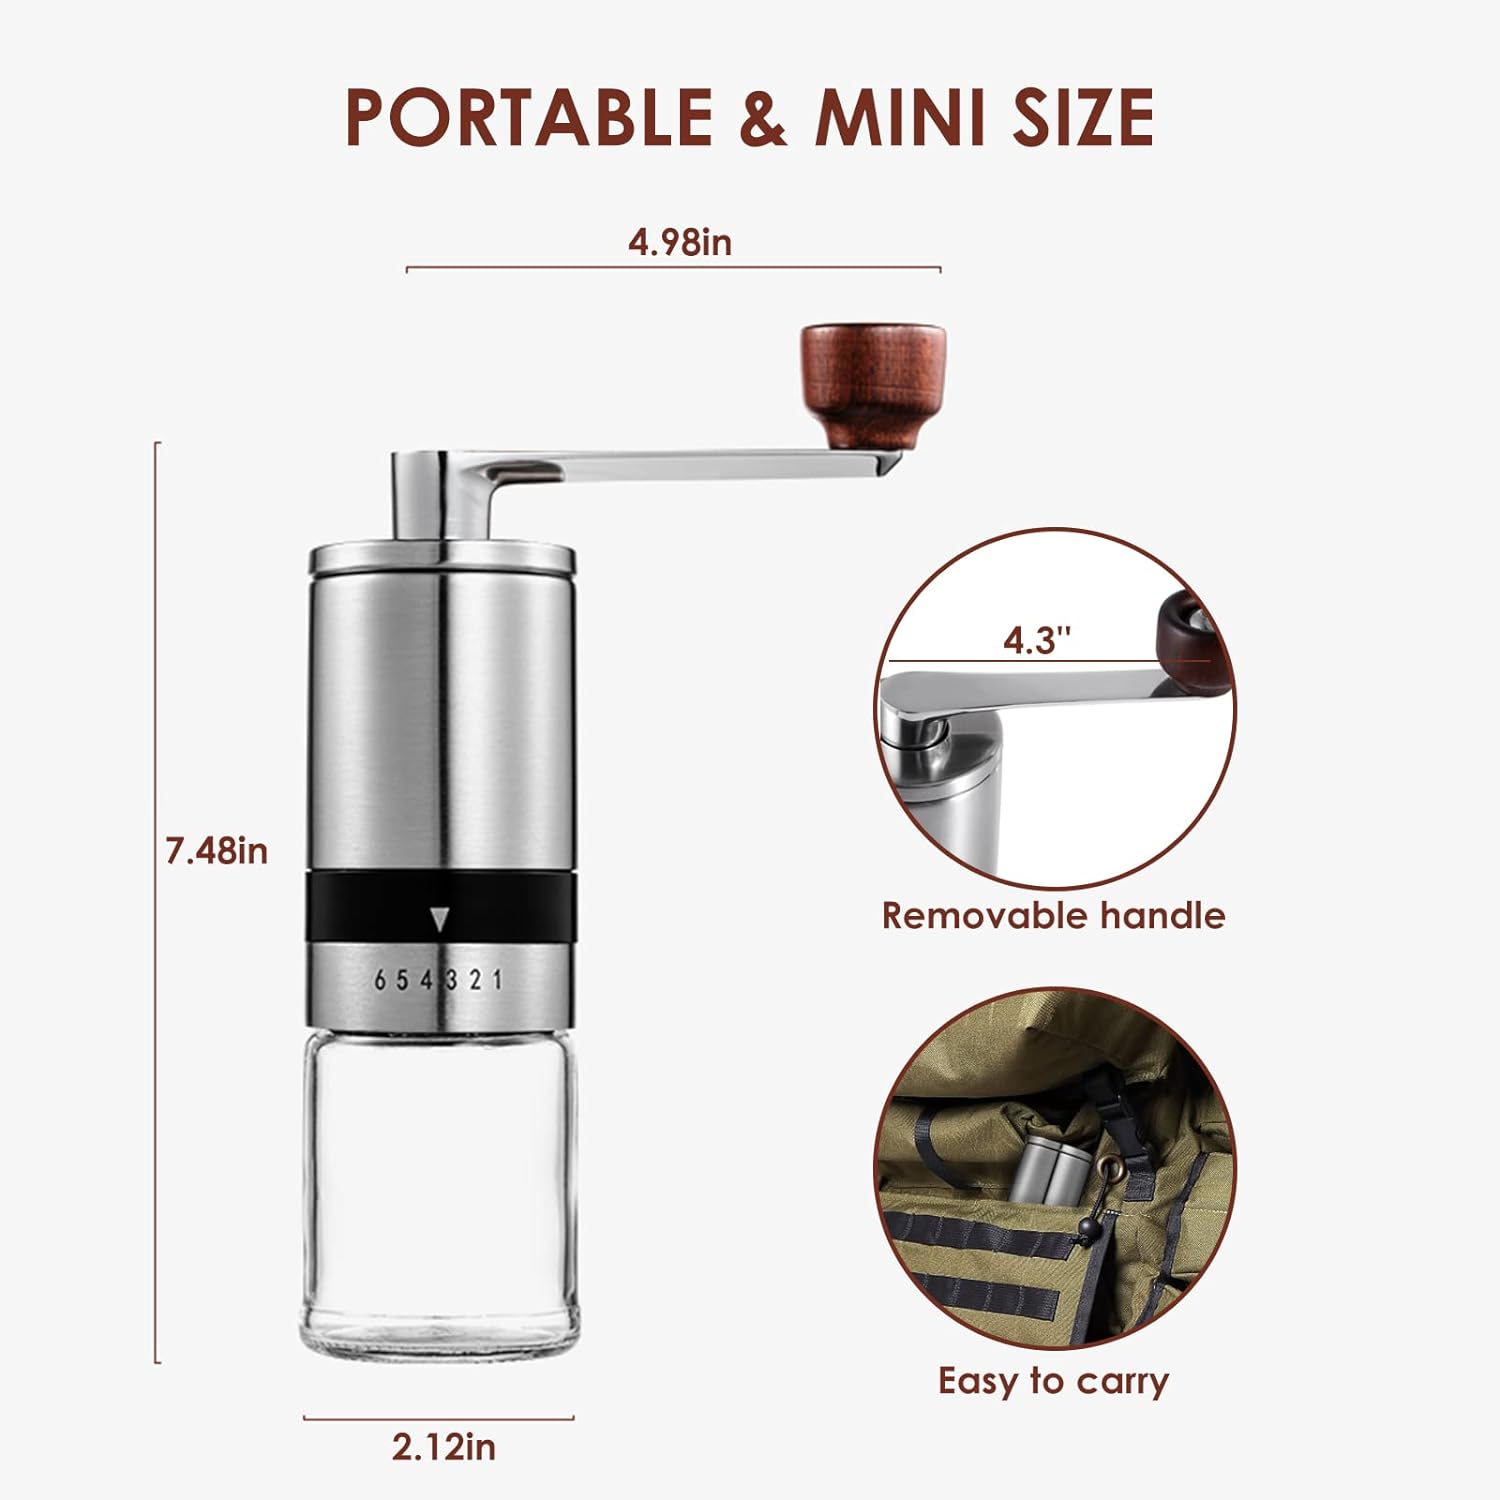 Koyatti Manual Coffee Grinder Stainless Steel with Conical Ceramic Burrs,6 Adjustable Setting,Portable Vintage Hand Coffee Bean Mill Faster Grinding for Travel Camping